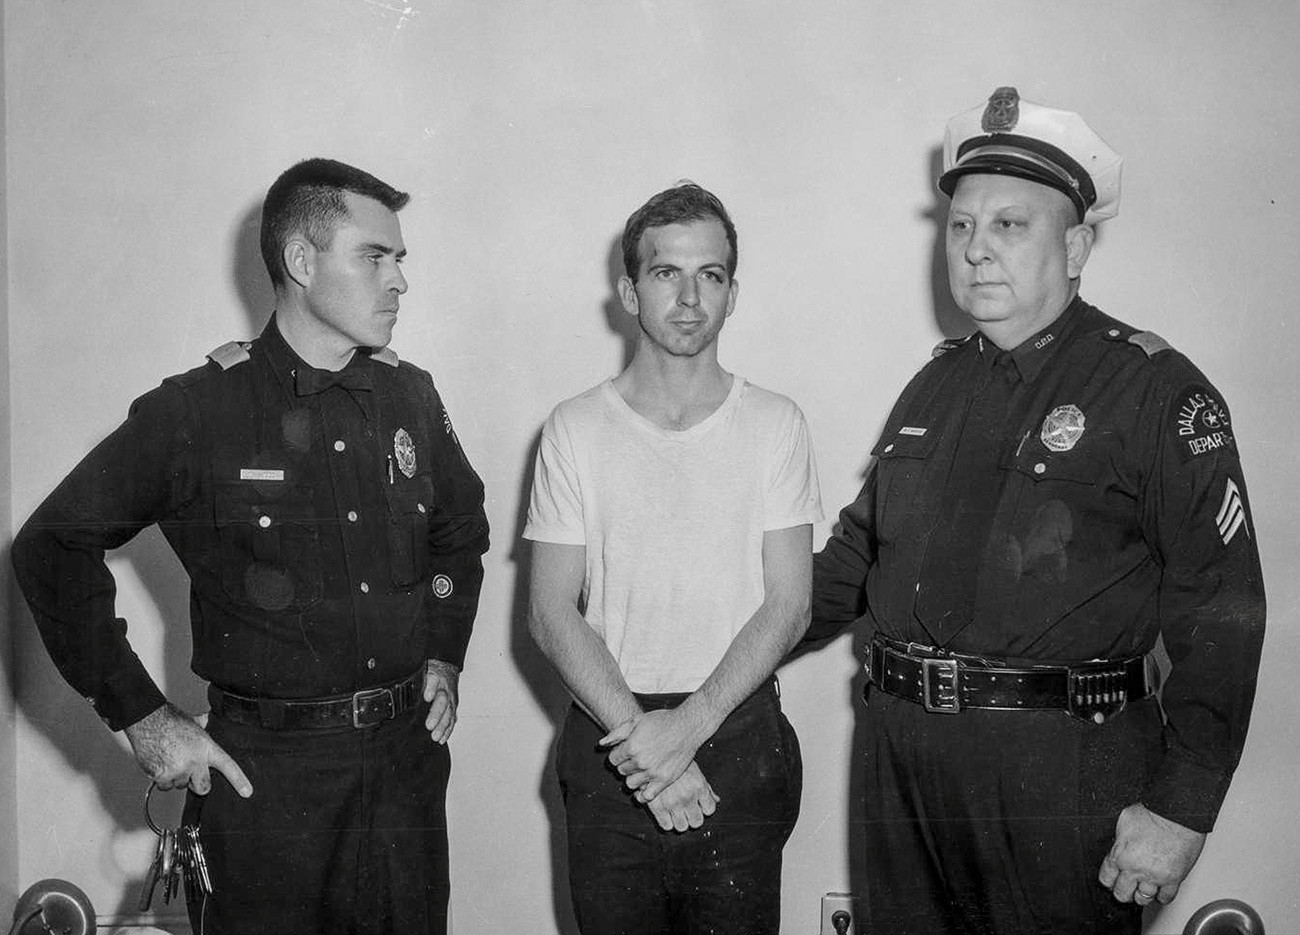 Dallas Police Department archive image shows accused Kennedy assassin Oswald standing with Dallas Police officers 